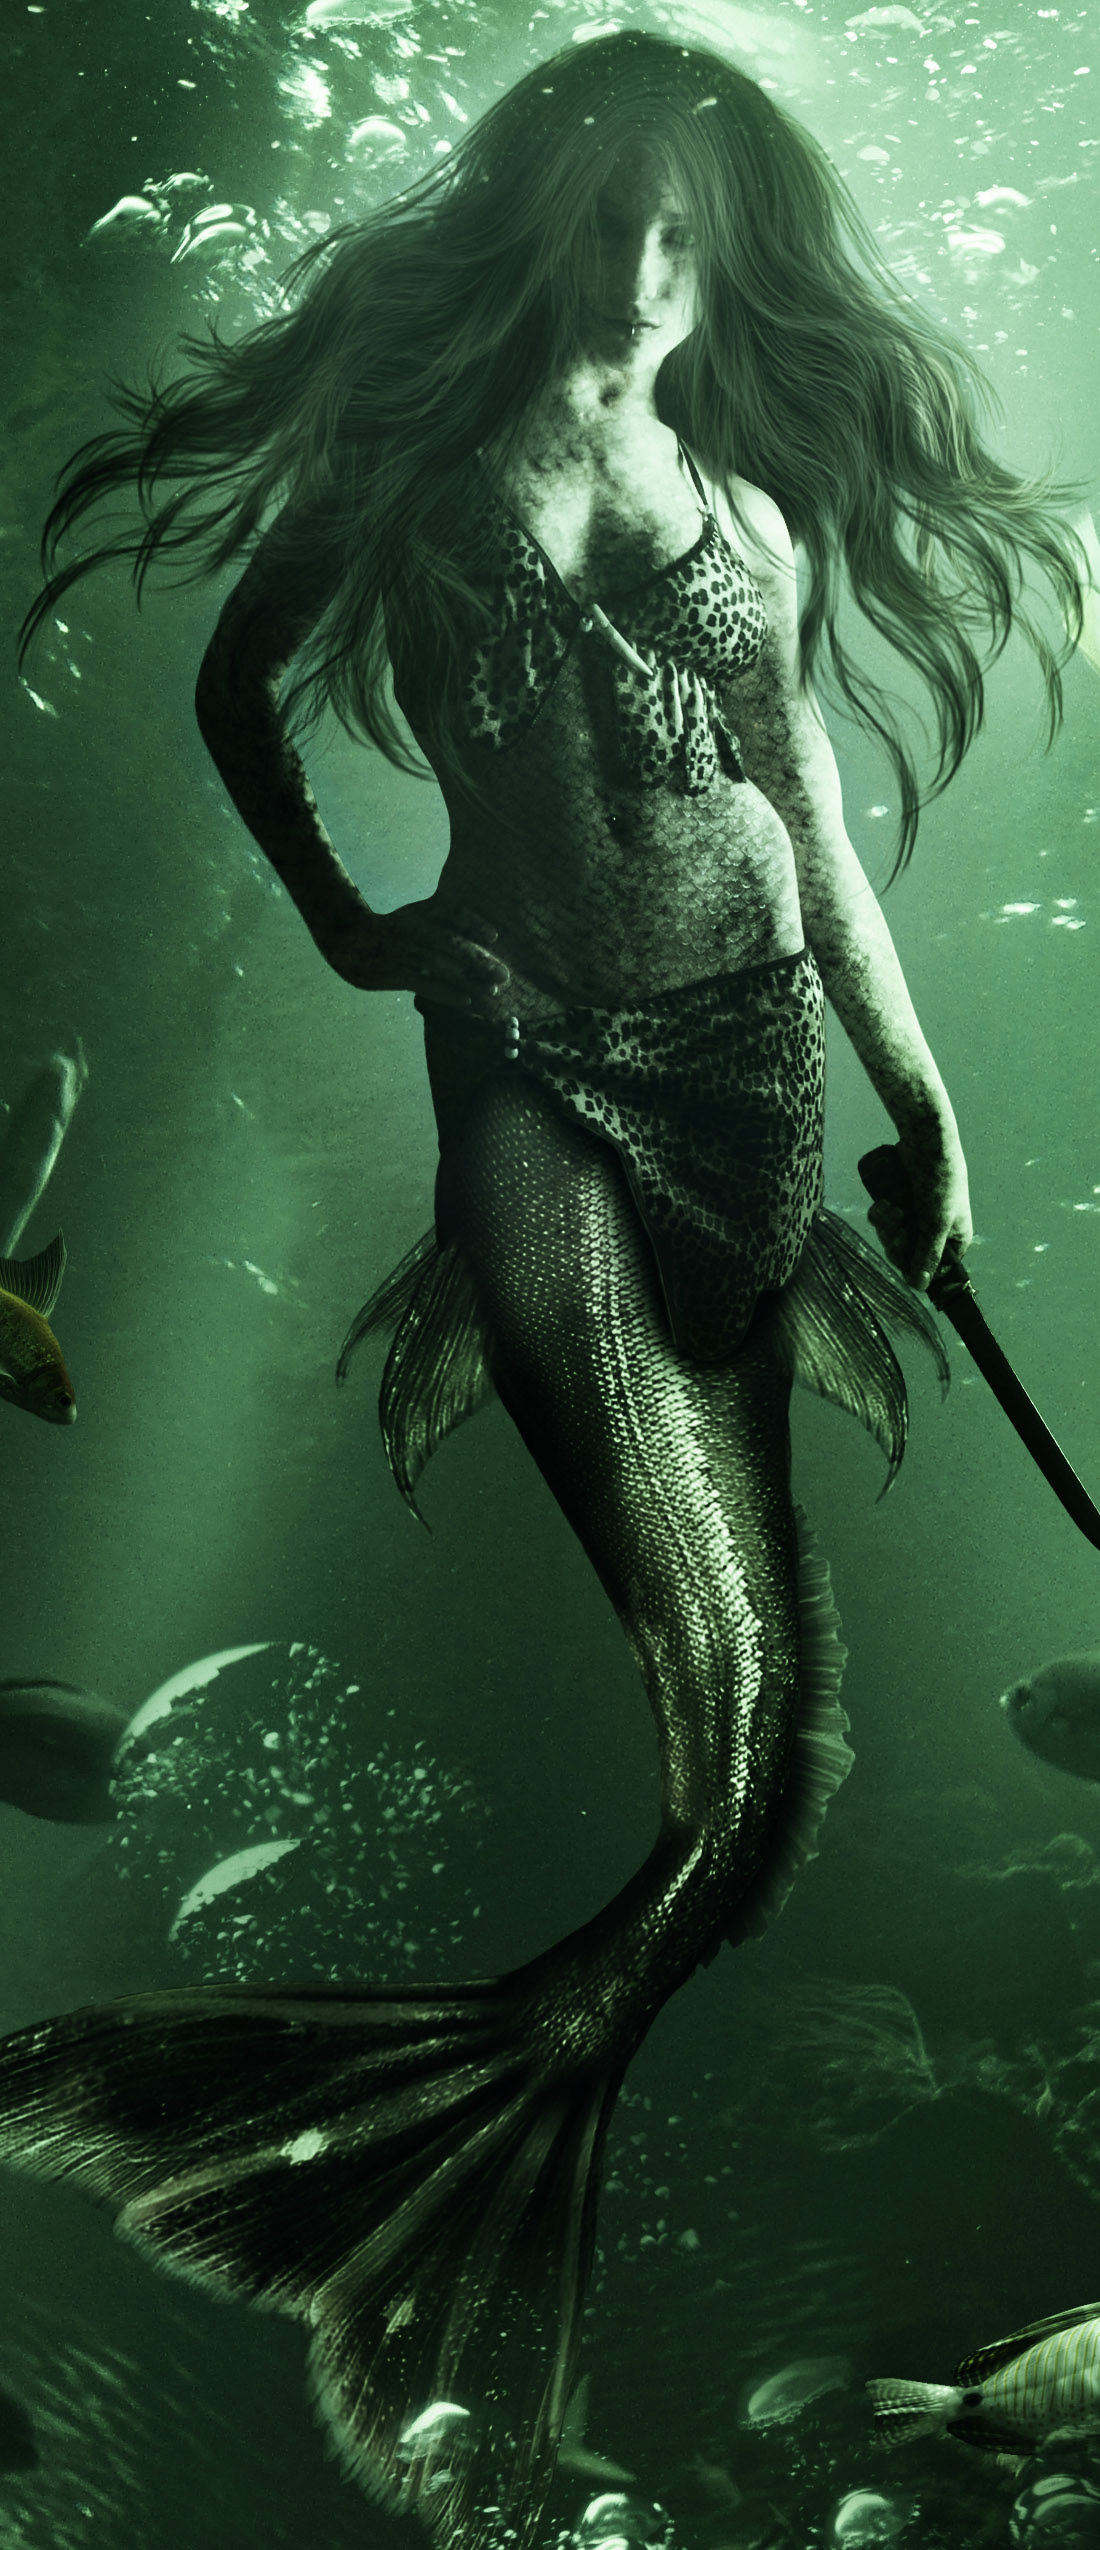 art-photo project by mythical creatures - SIREN :: Behance